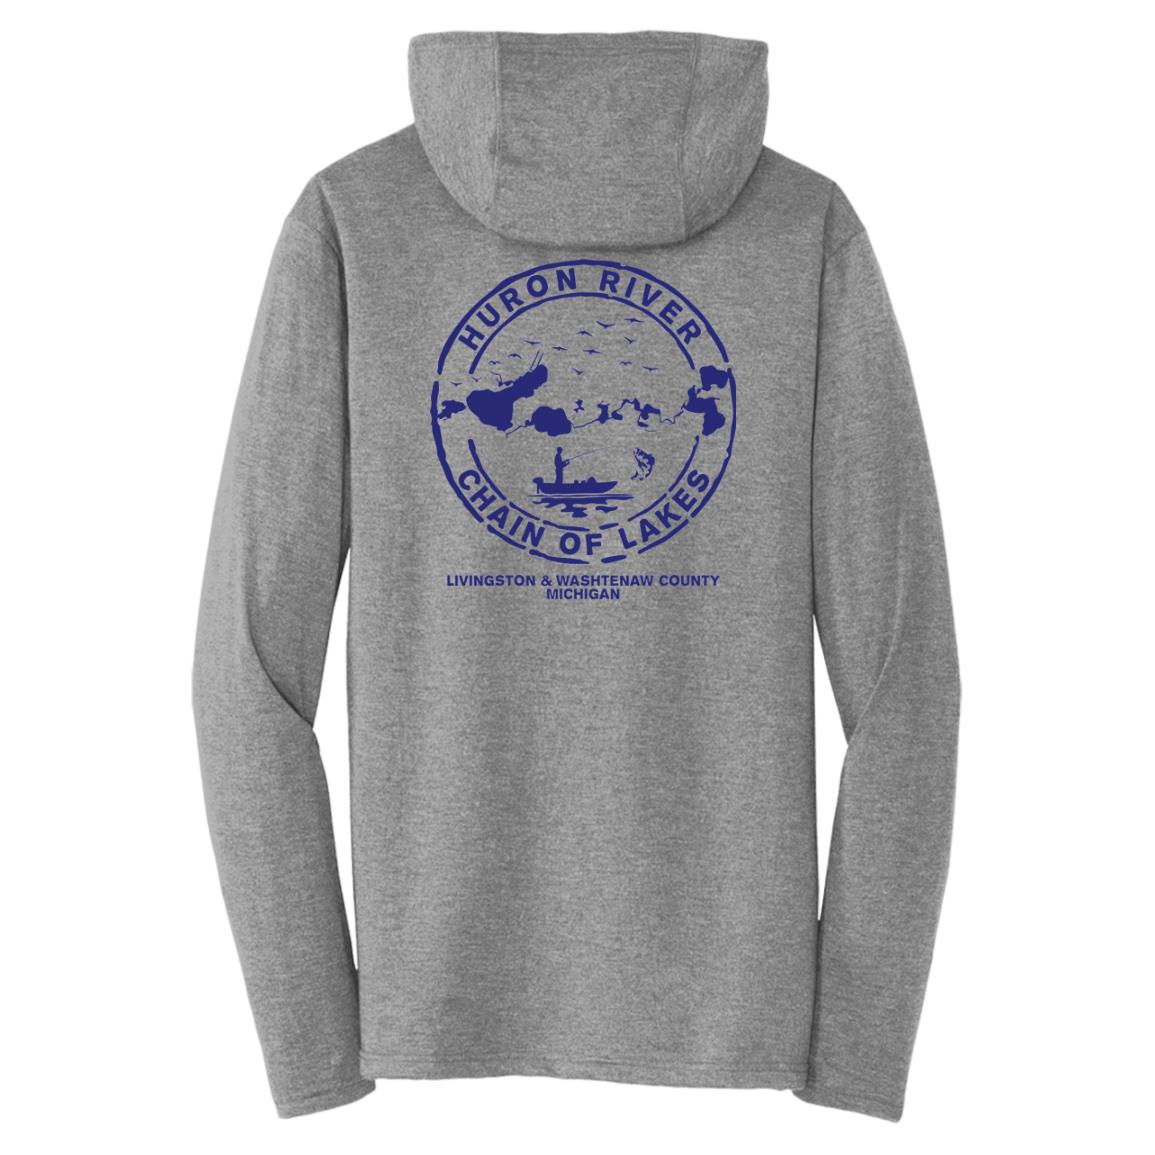 HRCL FL - Navy Boat.... Bust Out Another Thousand - 2 Sided DM139 Triblend T-Shirt Hoodie